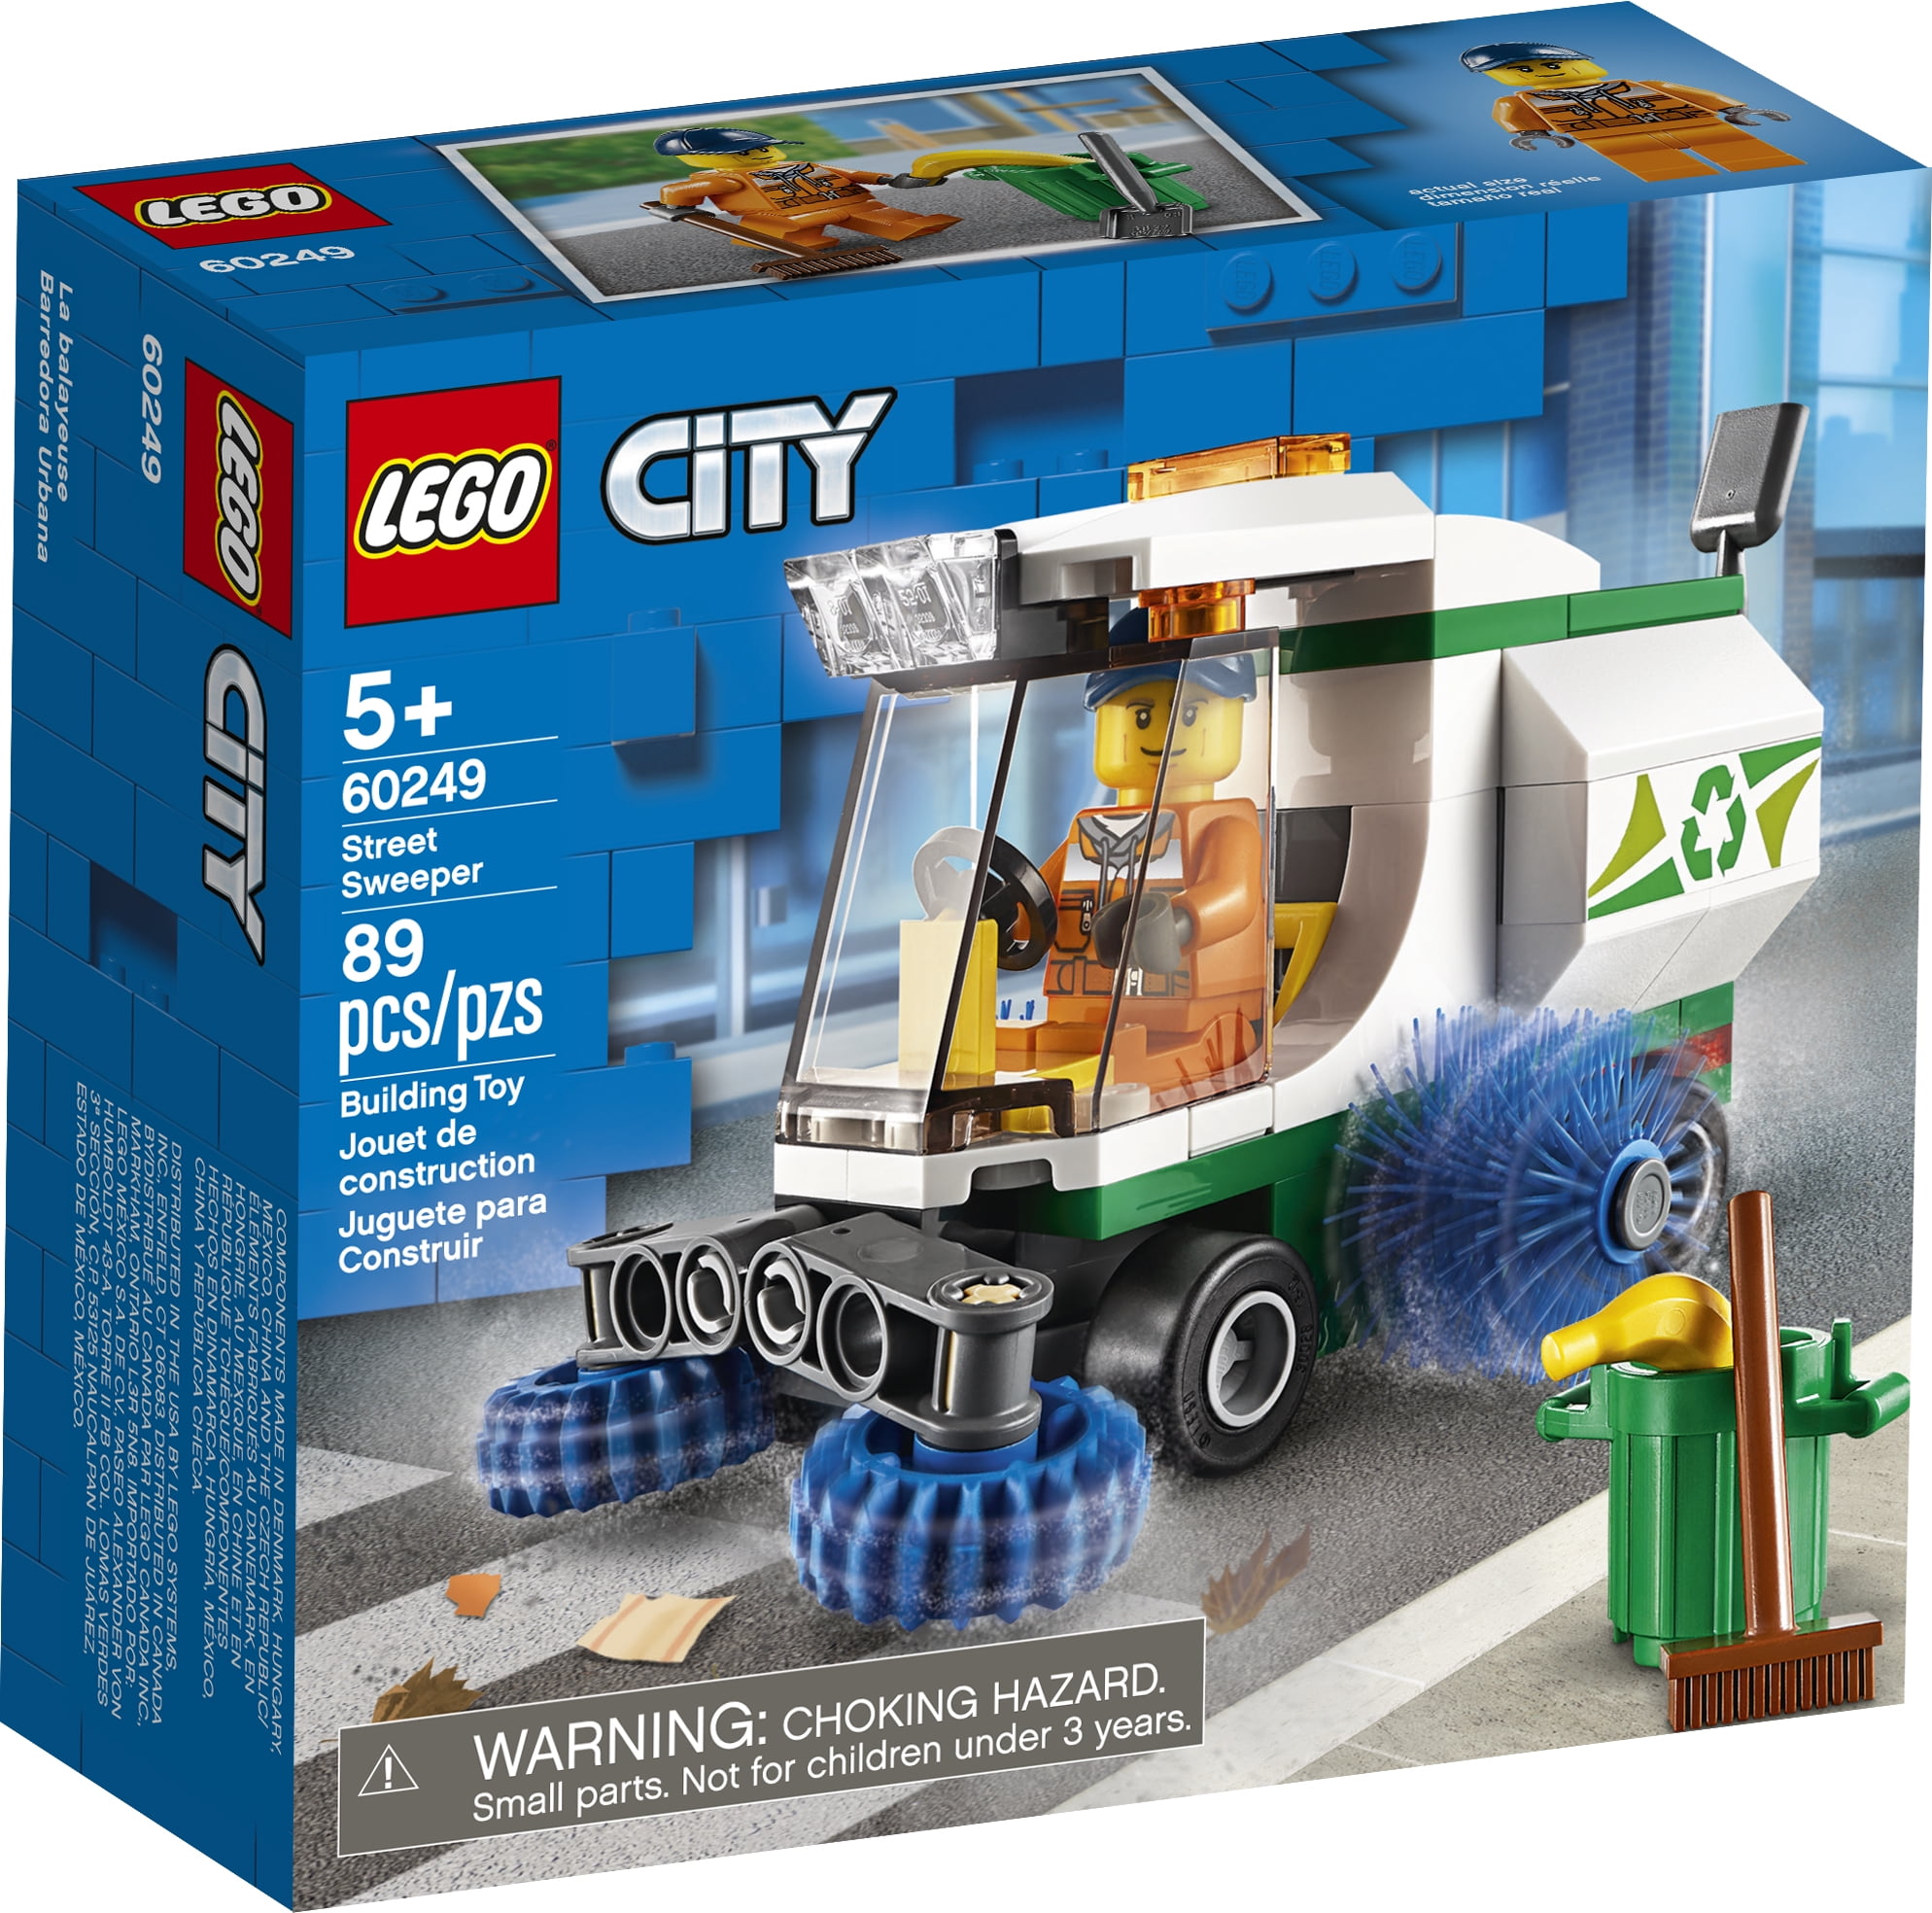 LEGO City Street Sweeper 60249 Toy for Kids Pieces) - Walmart.com